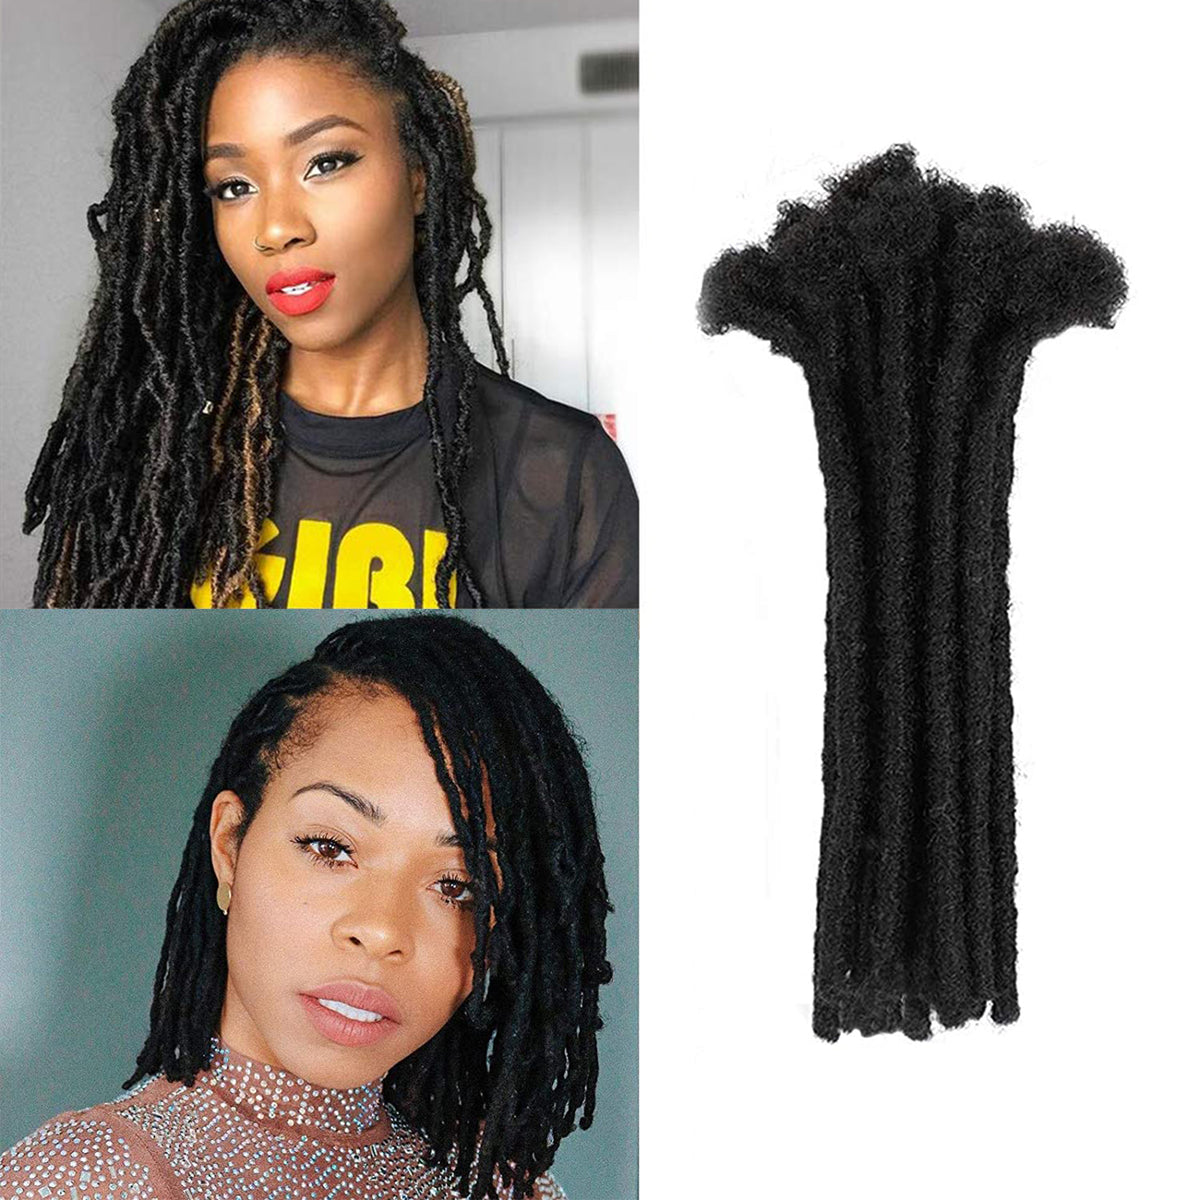 100% Human Hair Dreadlock Extensions 8 Inch 5 Strands Handmade Natural Loc Extensions Human Hair Bundle Dreads Extensions For Woman & Men Can Be Dyed/Bleached  (8 Inch 5 Strands, 0.8cm Natural Black)